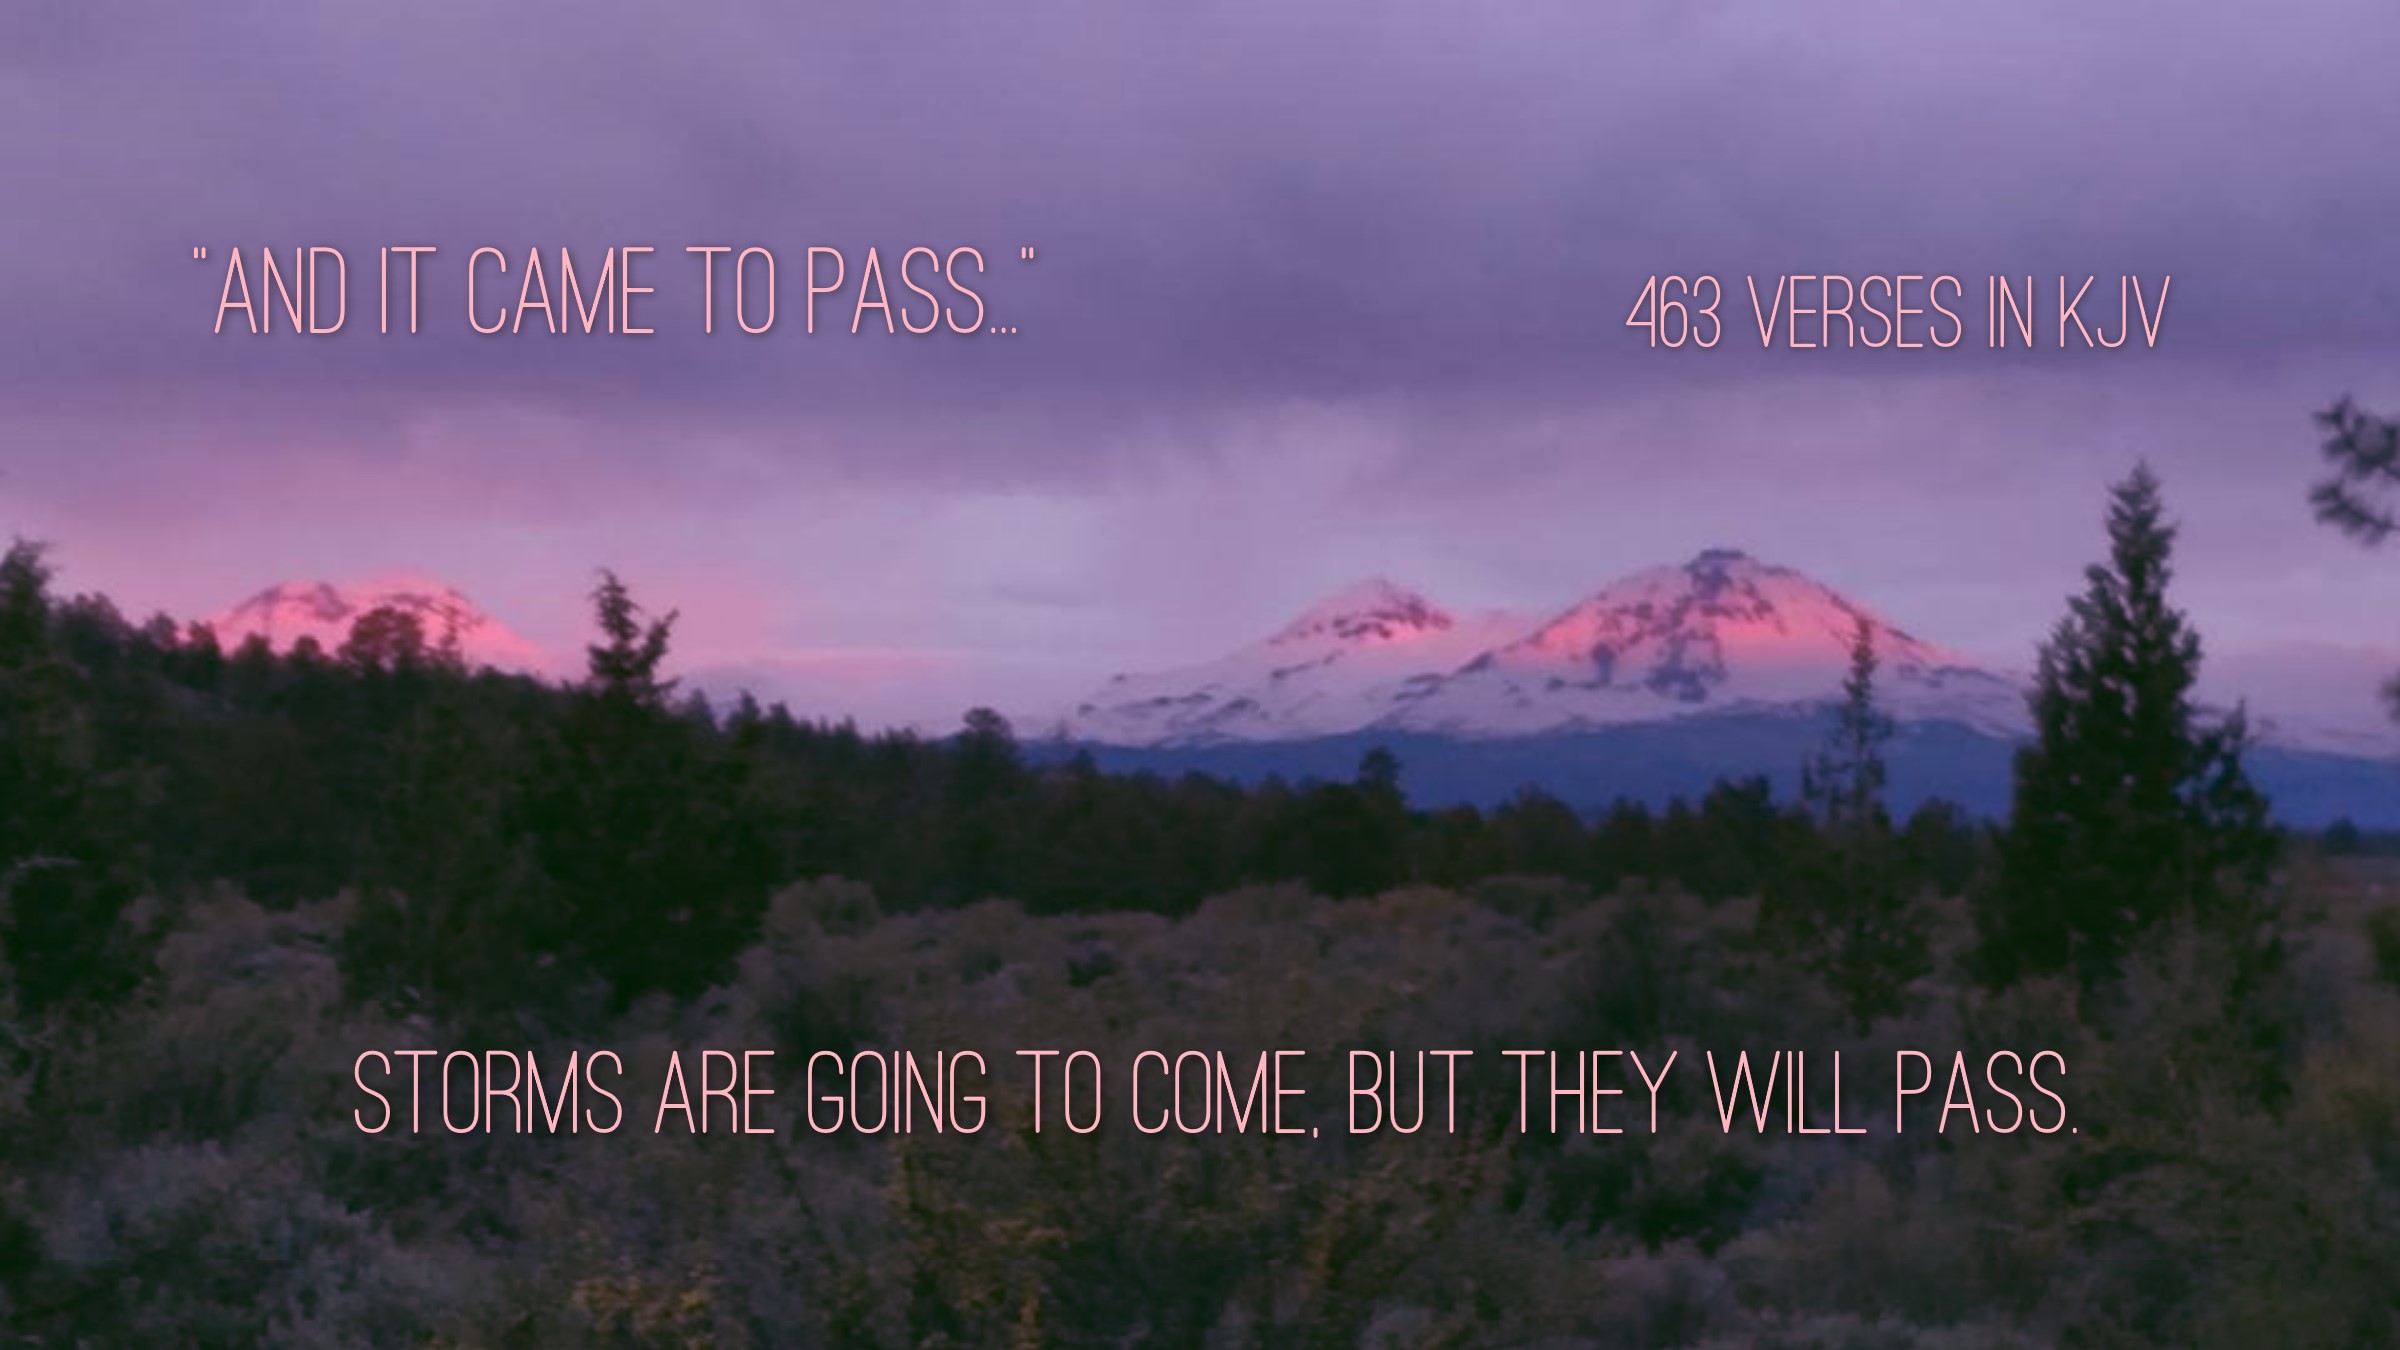 Three snow capped mountains covered with snow with pink sunrise in background with pine trees and storm clouds in the foreground And it came to pass 463 verses in the KJV Storms are going to come but they will pass